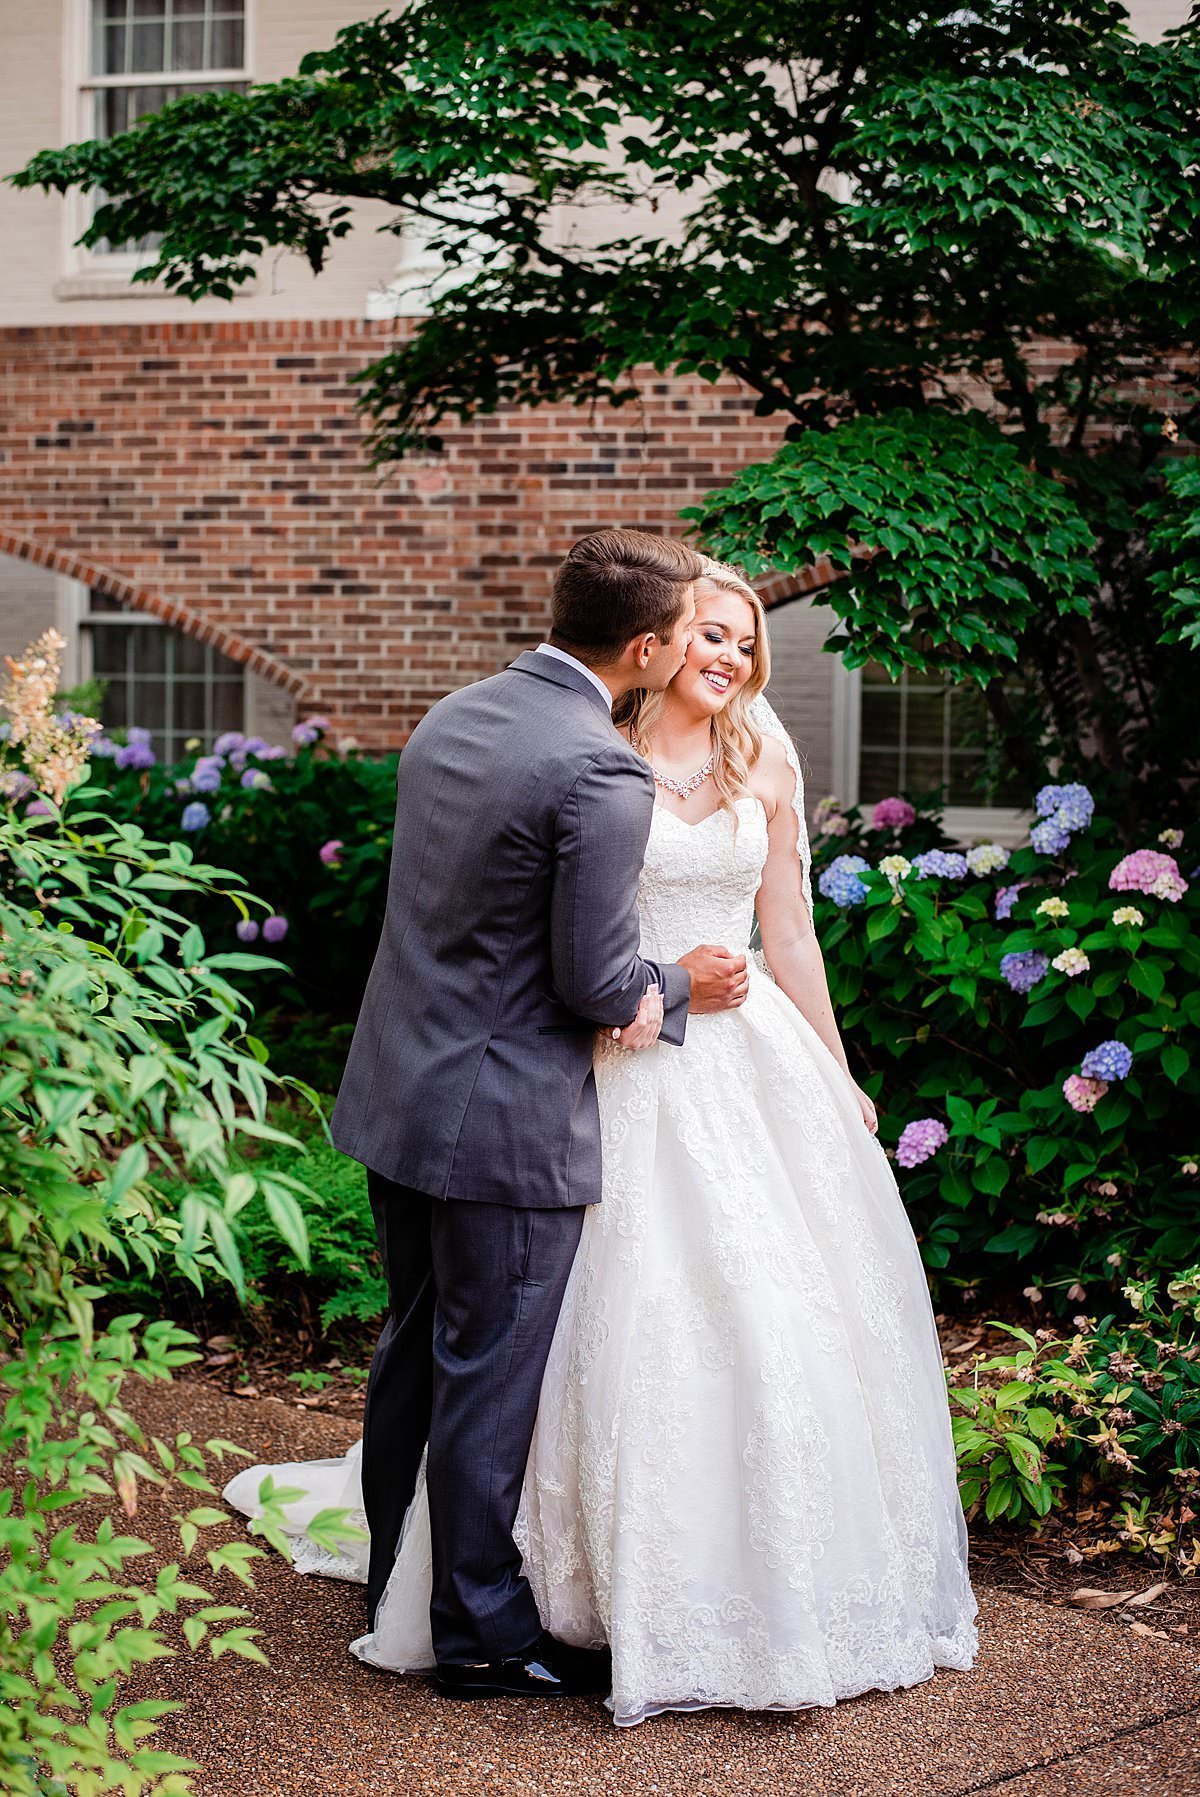 Couple standing together in outdoor courtyard with natural plants and hydrangeas around them